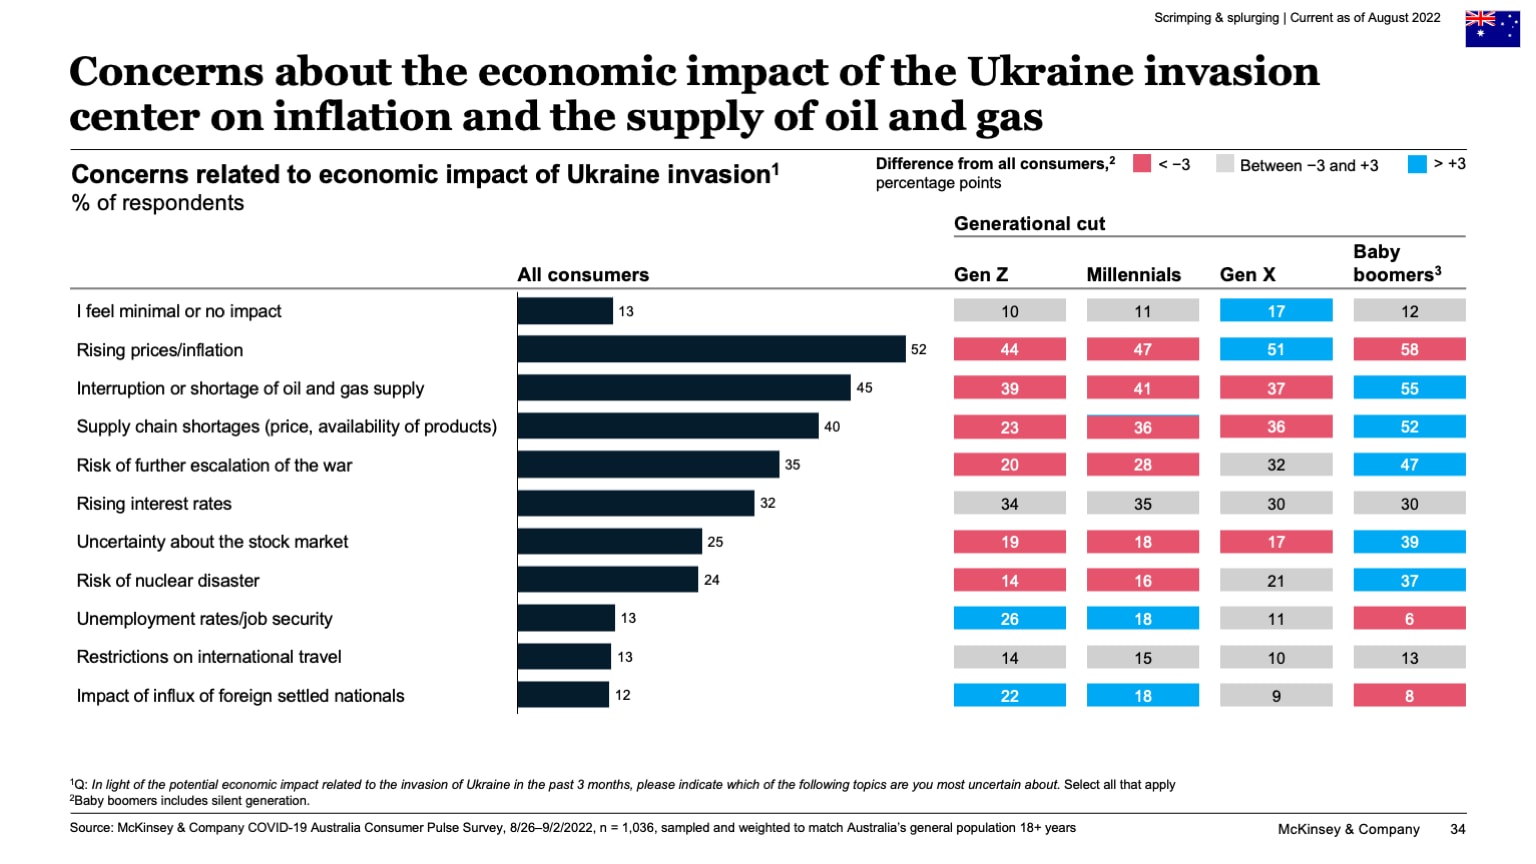 Concerns about the economic impact of the Ukraine invasion center on inflation and the supply of oil and gas